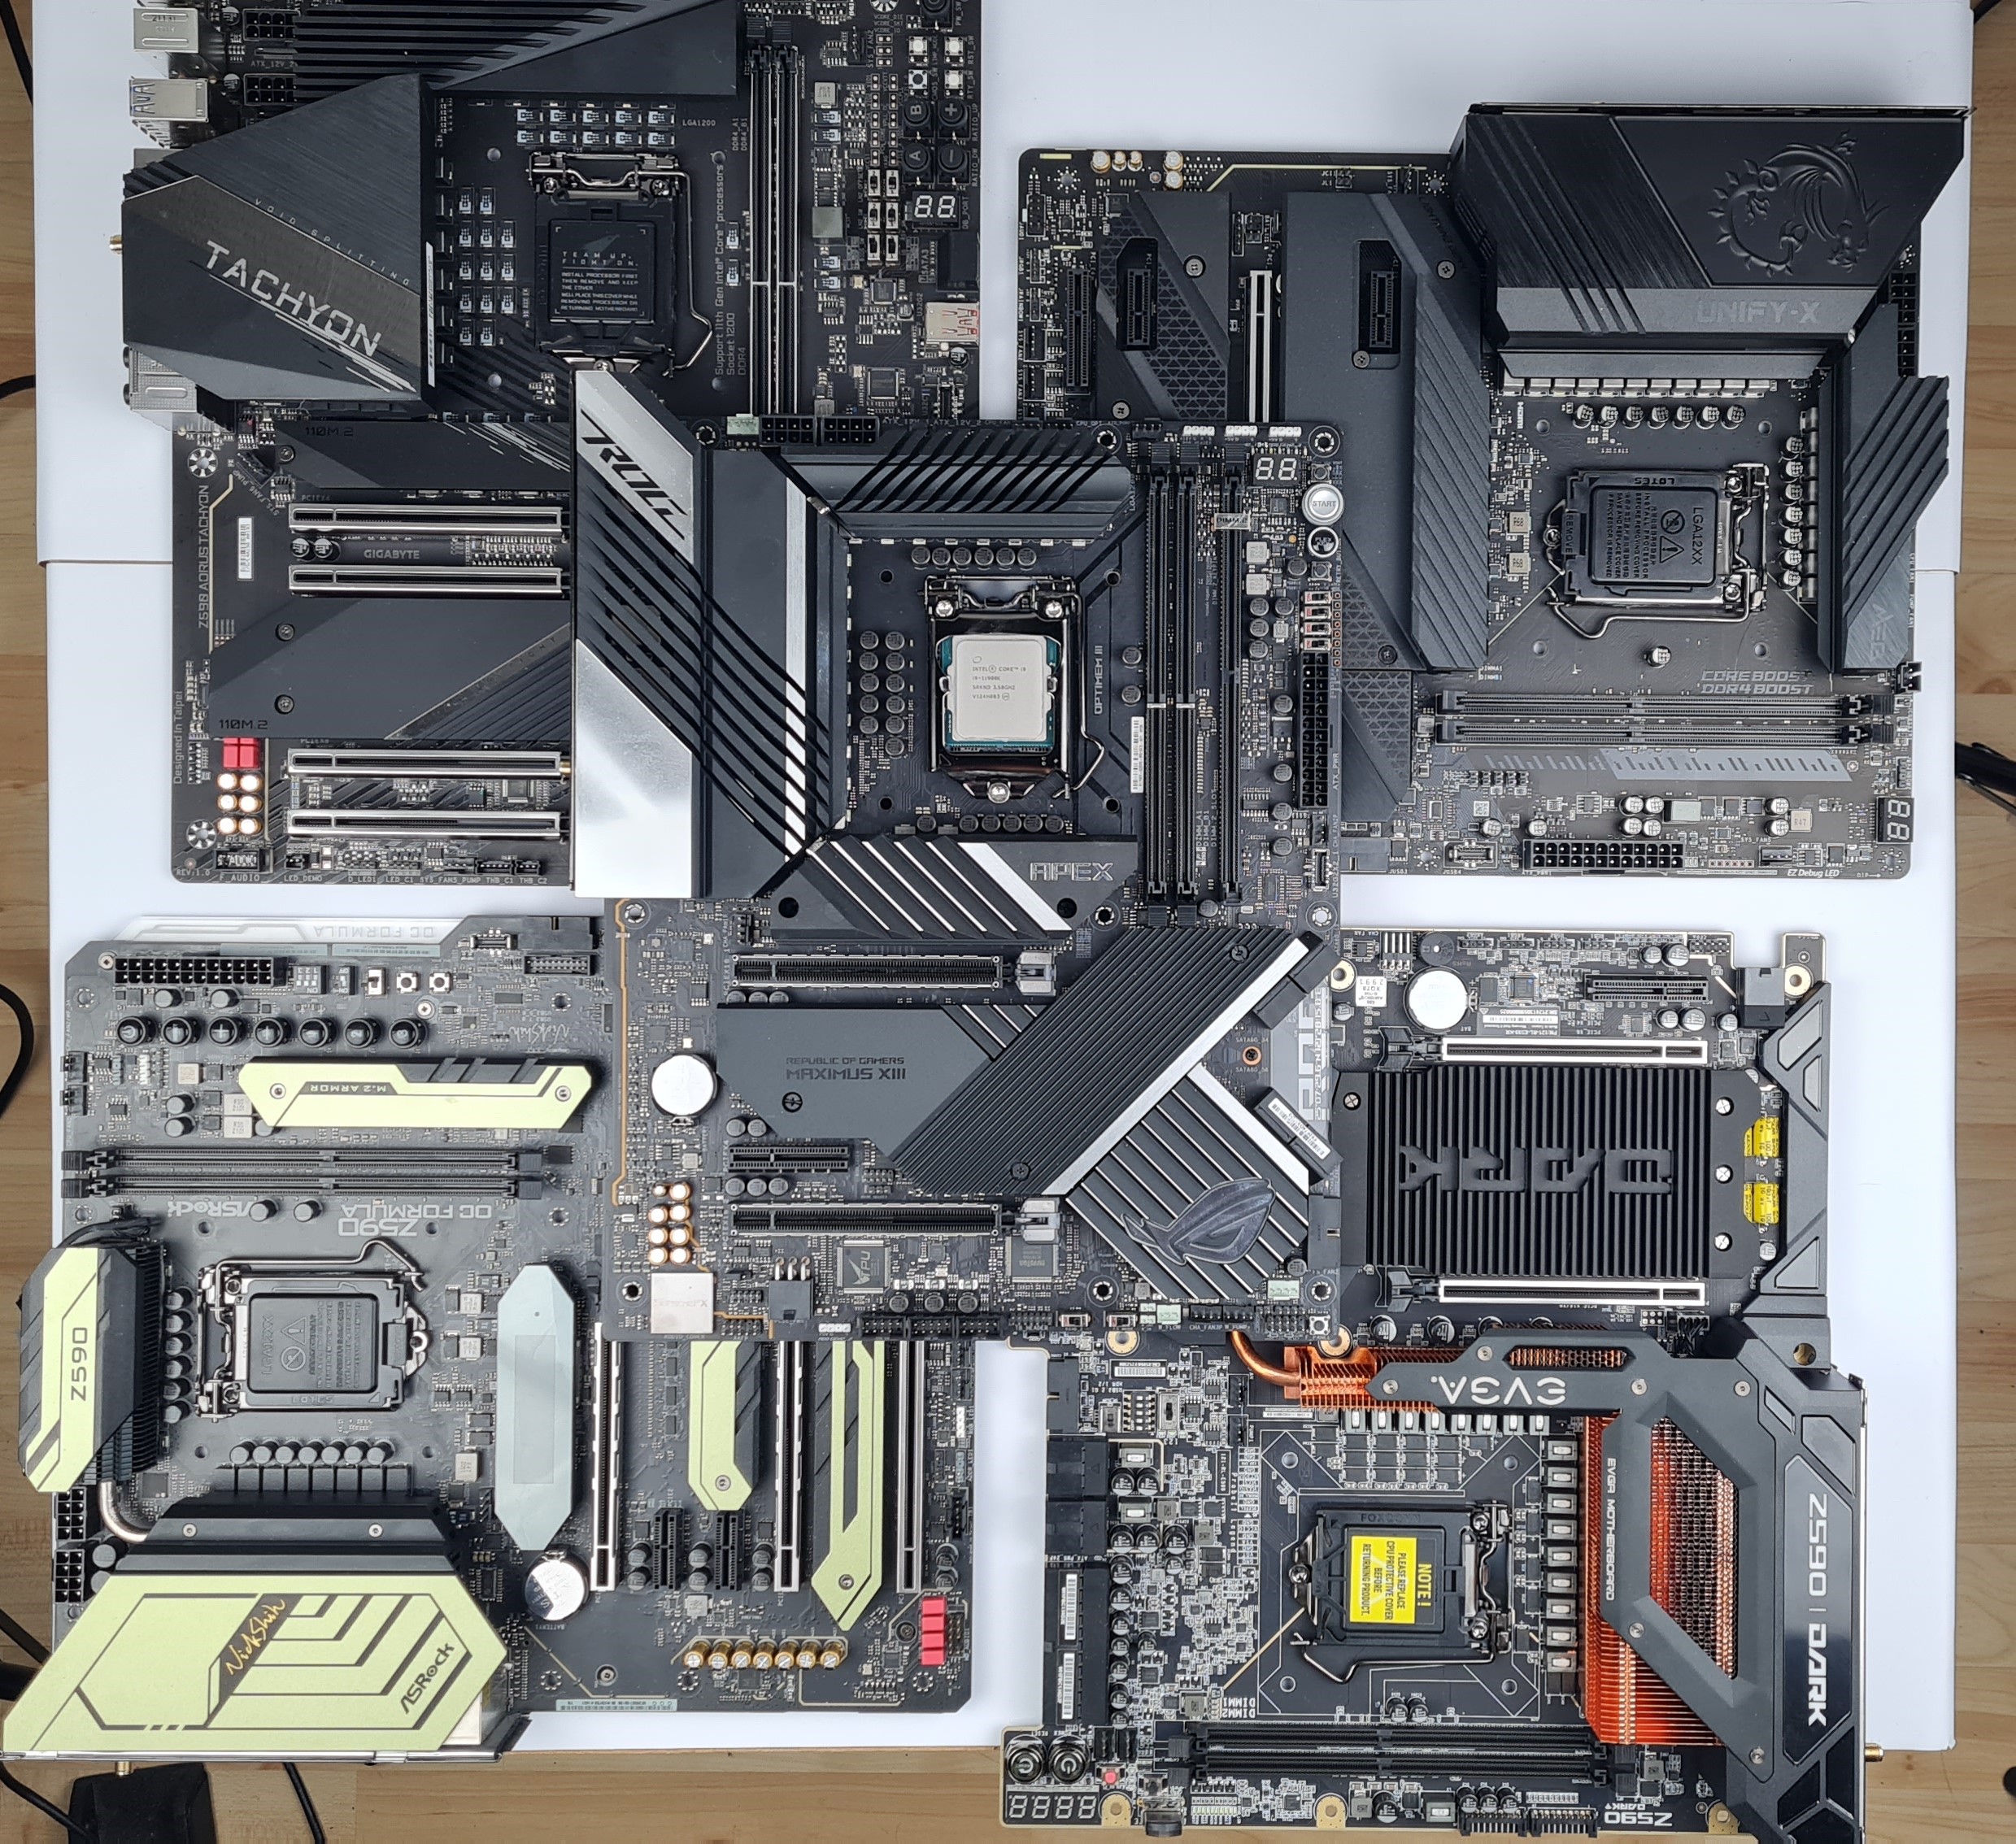 The Good, the Bad and the Ugly – Alle Z590 XOC-Mainboards im großen Roundup